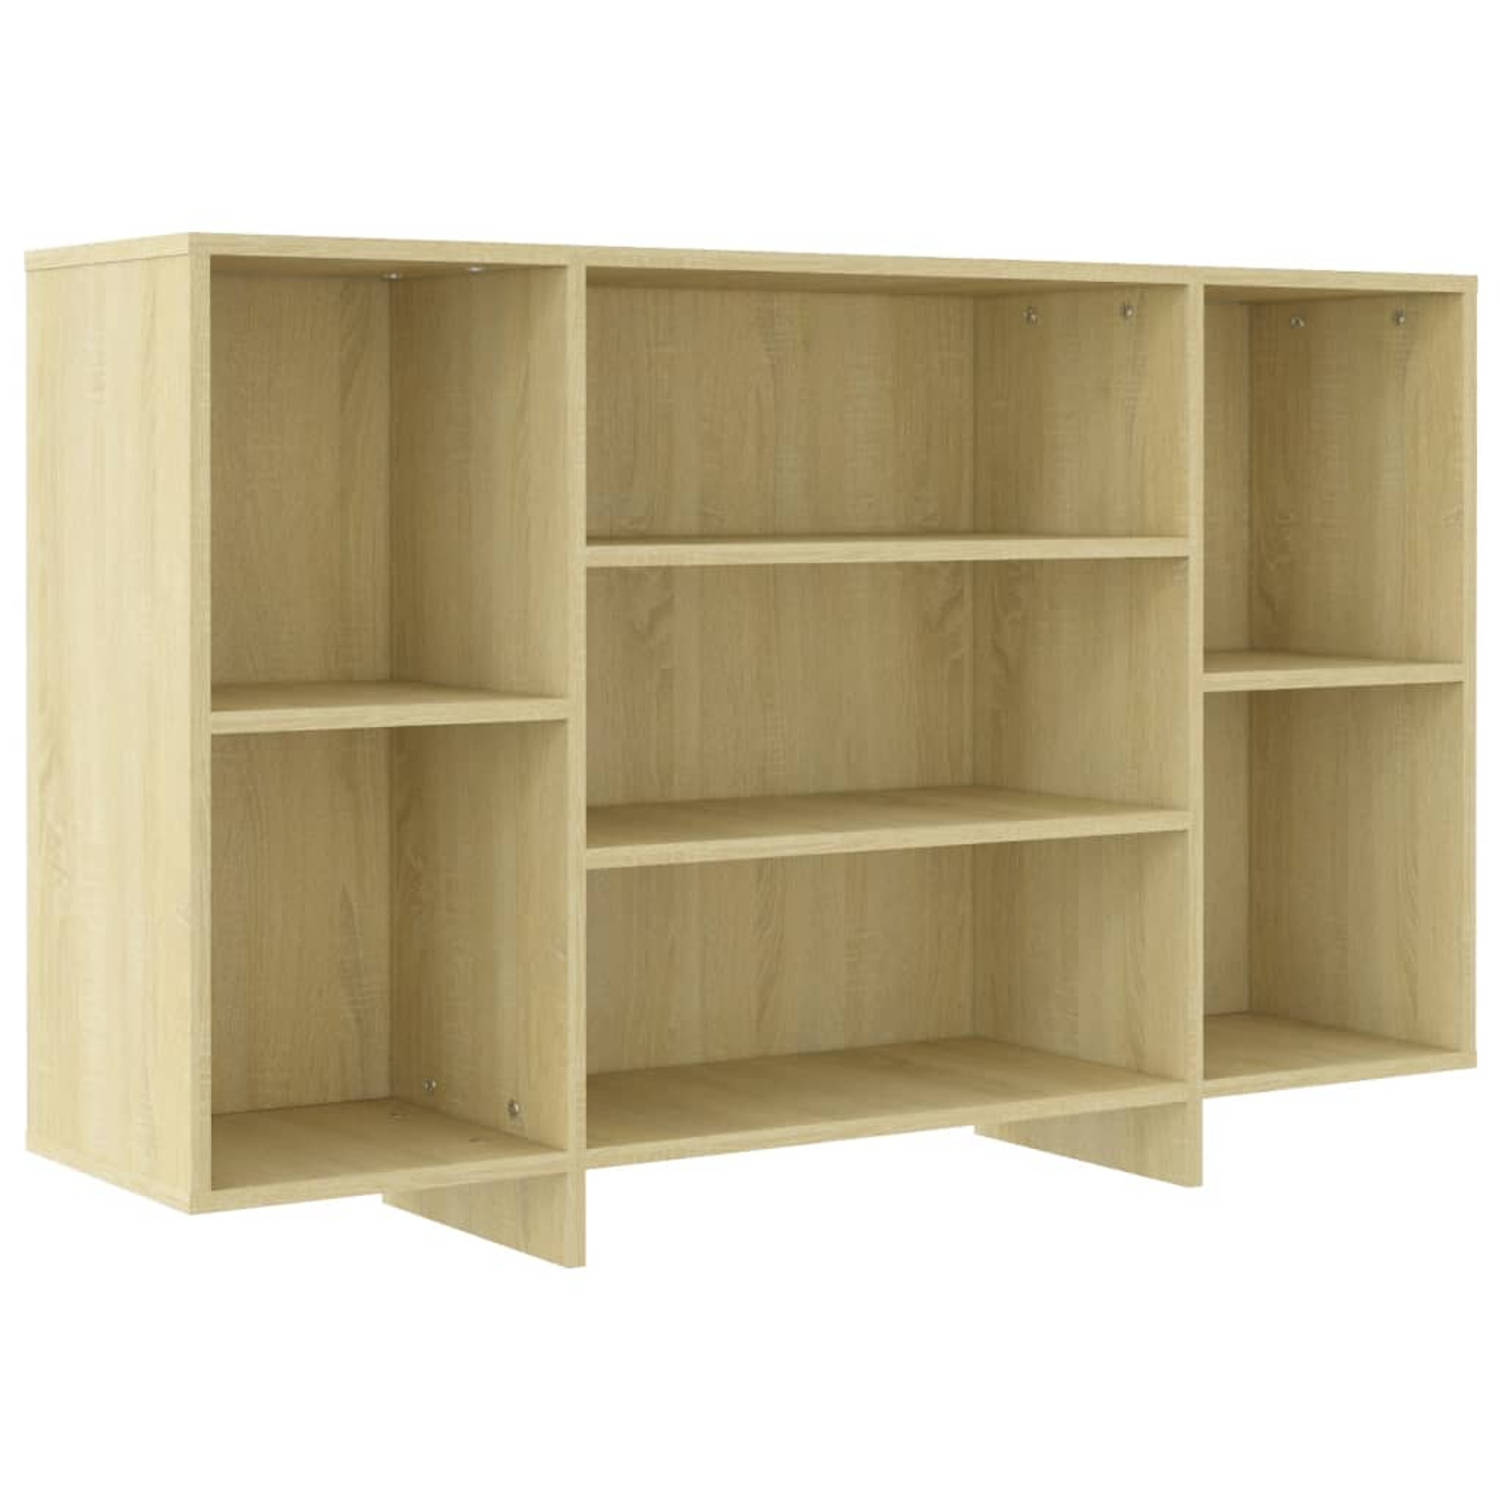 The Living Store Bijzetkast - Sonoma Eiken - 120 x 30 x 75 cm is a optimized product title using the given information